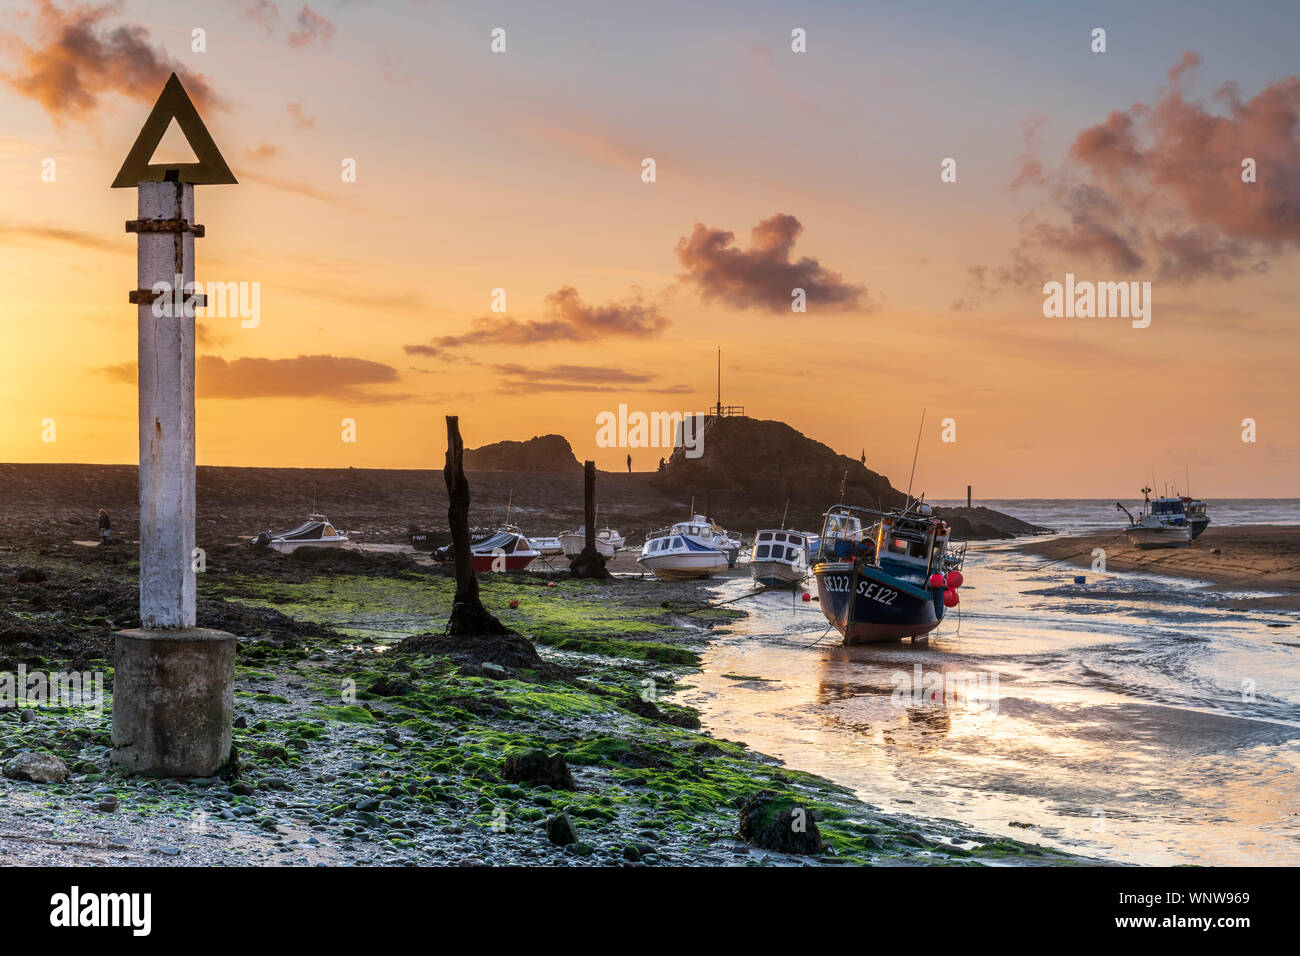 Bude, North Cornwall, England. Friday 6th September 2019. UK Weather. After a day of heavy showers and grey skies in the West of England, most of the holidaymakers have now returned home as the season draws to a close. At dusk the clouds finally clear as the sun sets over the breakwater and little harbour at Bude in North Cornwall. Terry Mathews/Alamy Live News. Stock Photo